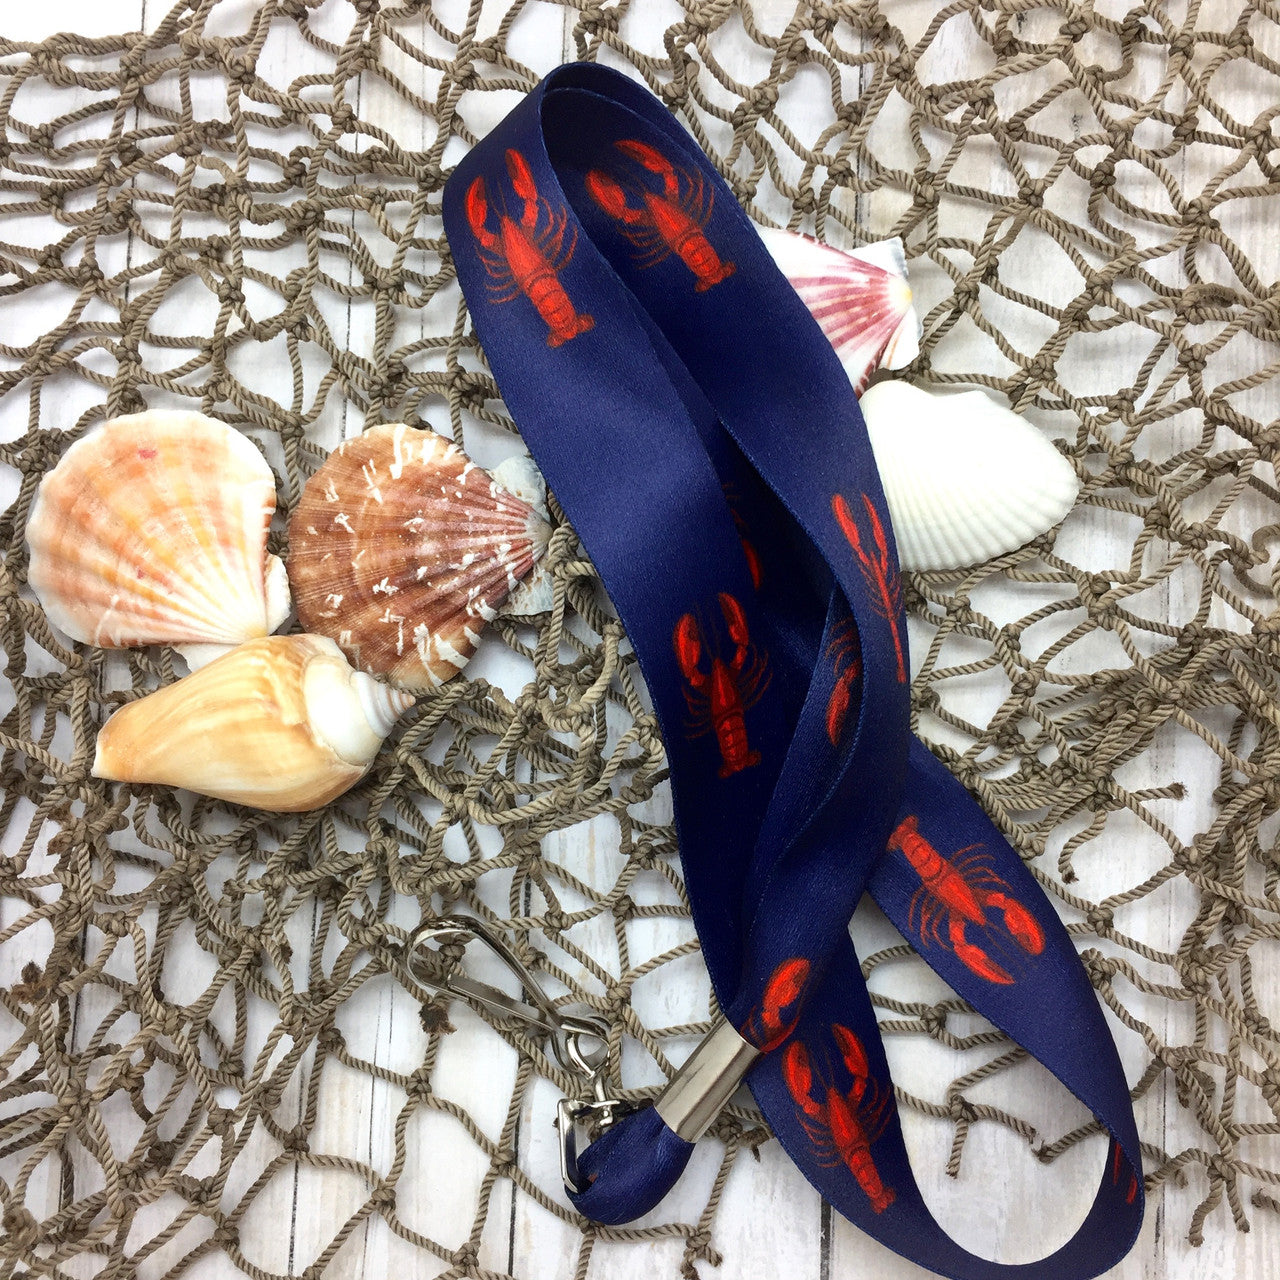 Make our lobster ribbon part of your Summer fun! This is a great lanyard for family or corporate clambakes and a great souvenir to remember the event!